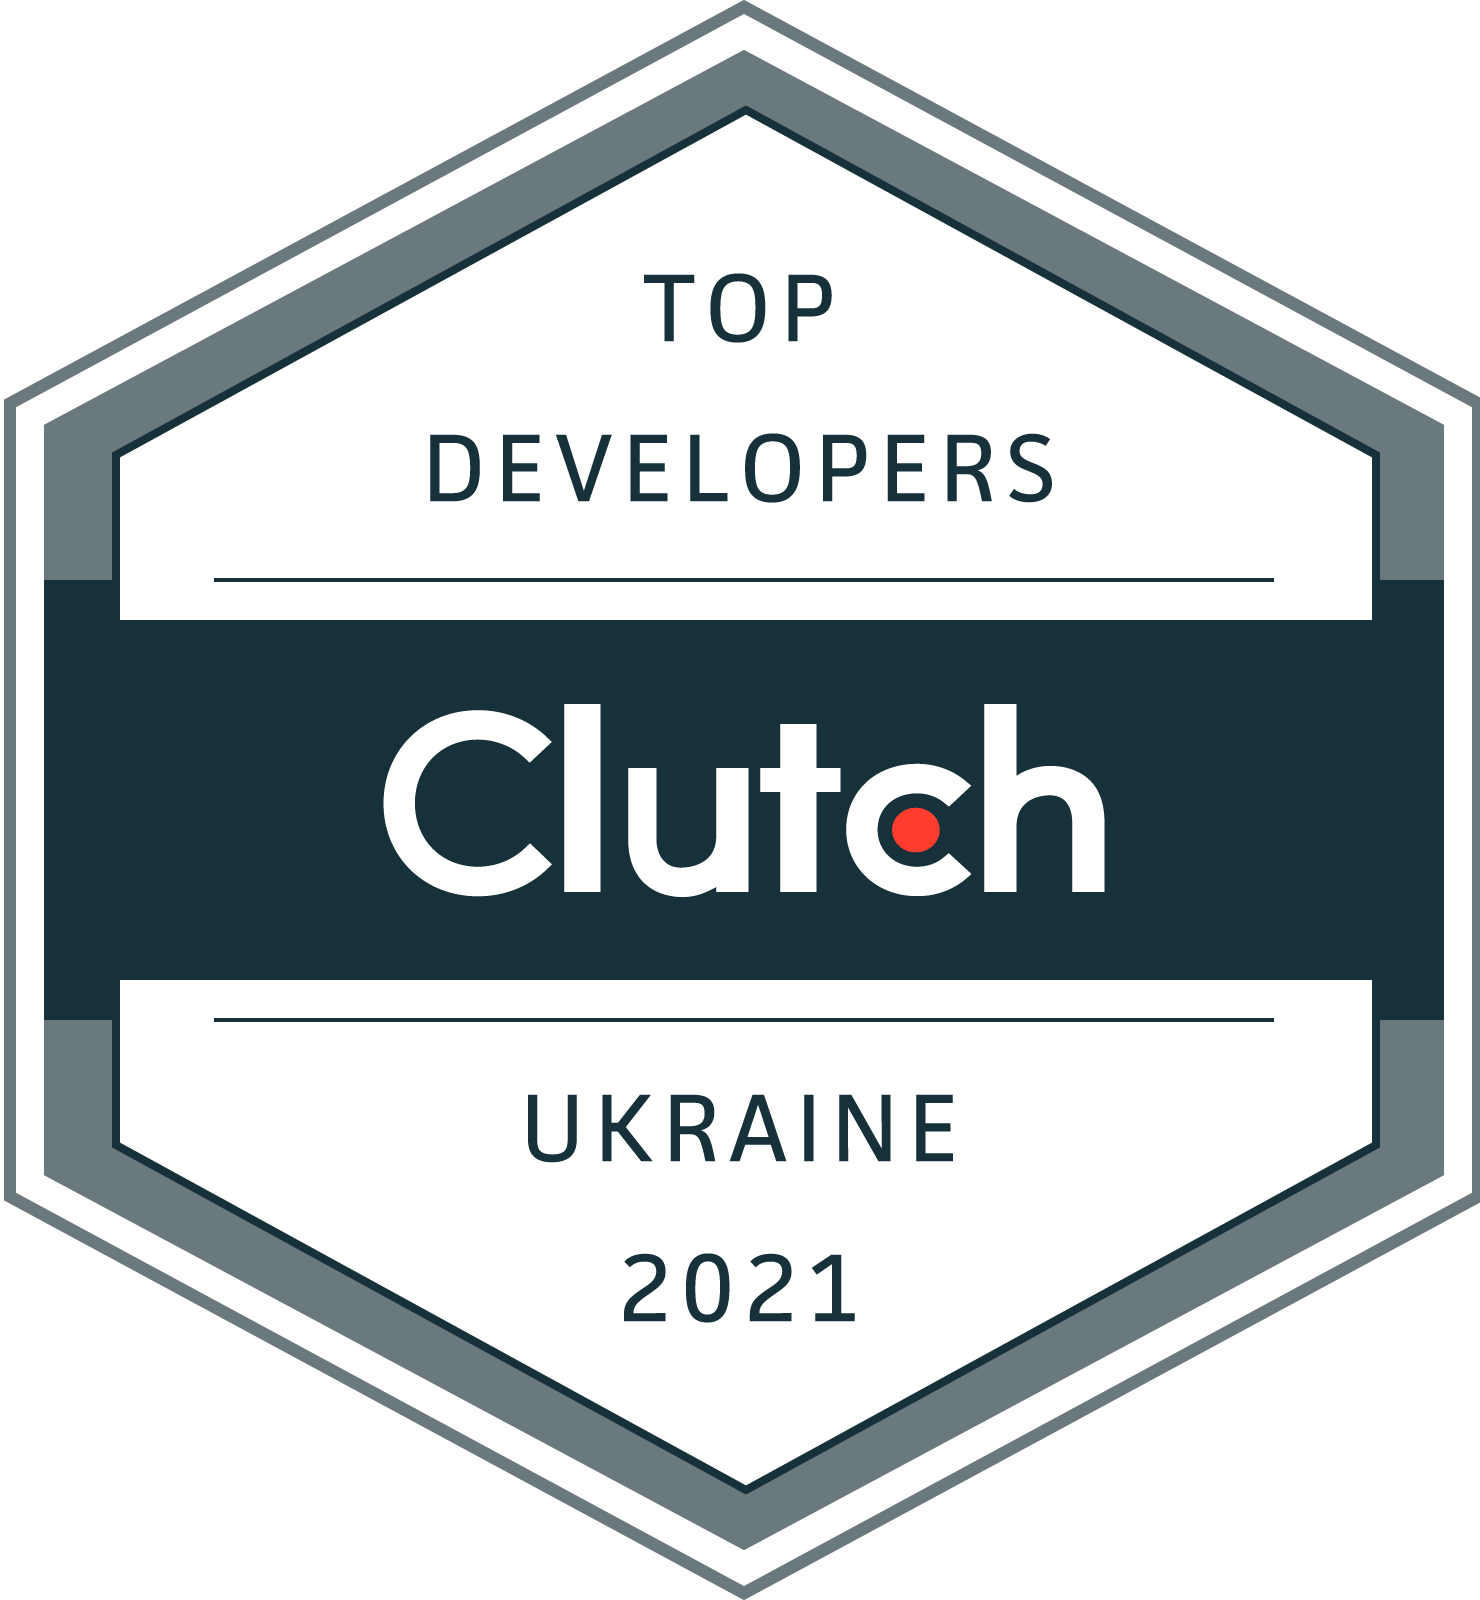 Brainence Named by Clutch as Top Software Developer in Ukraine